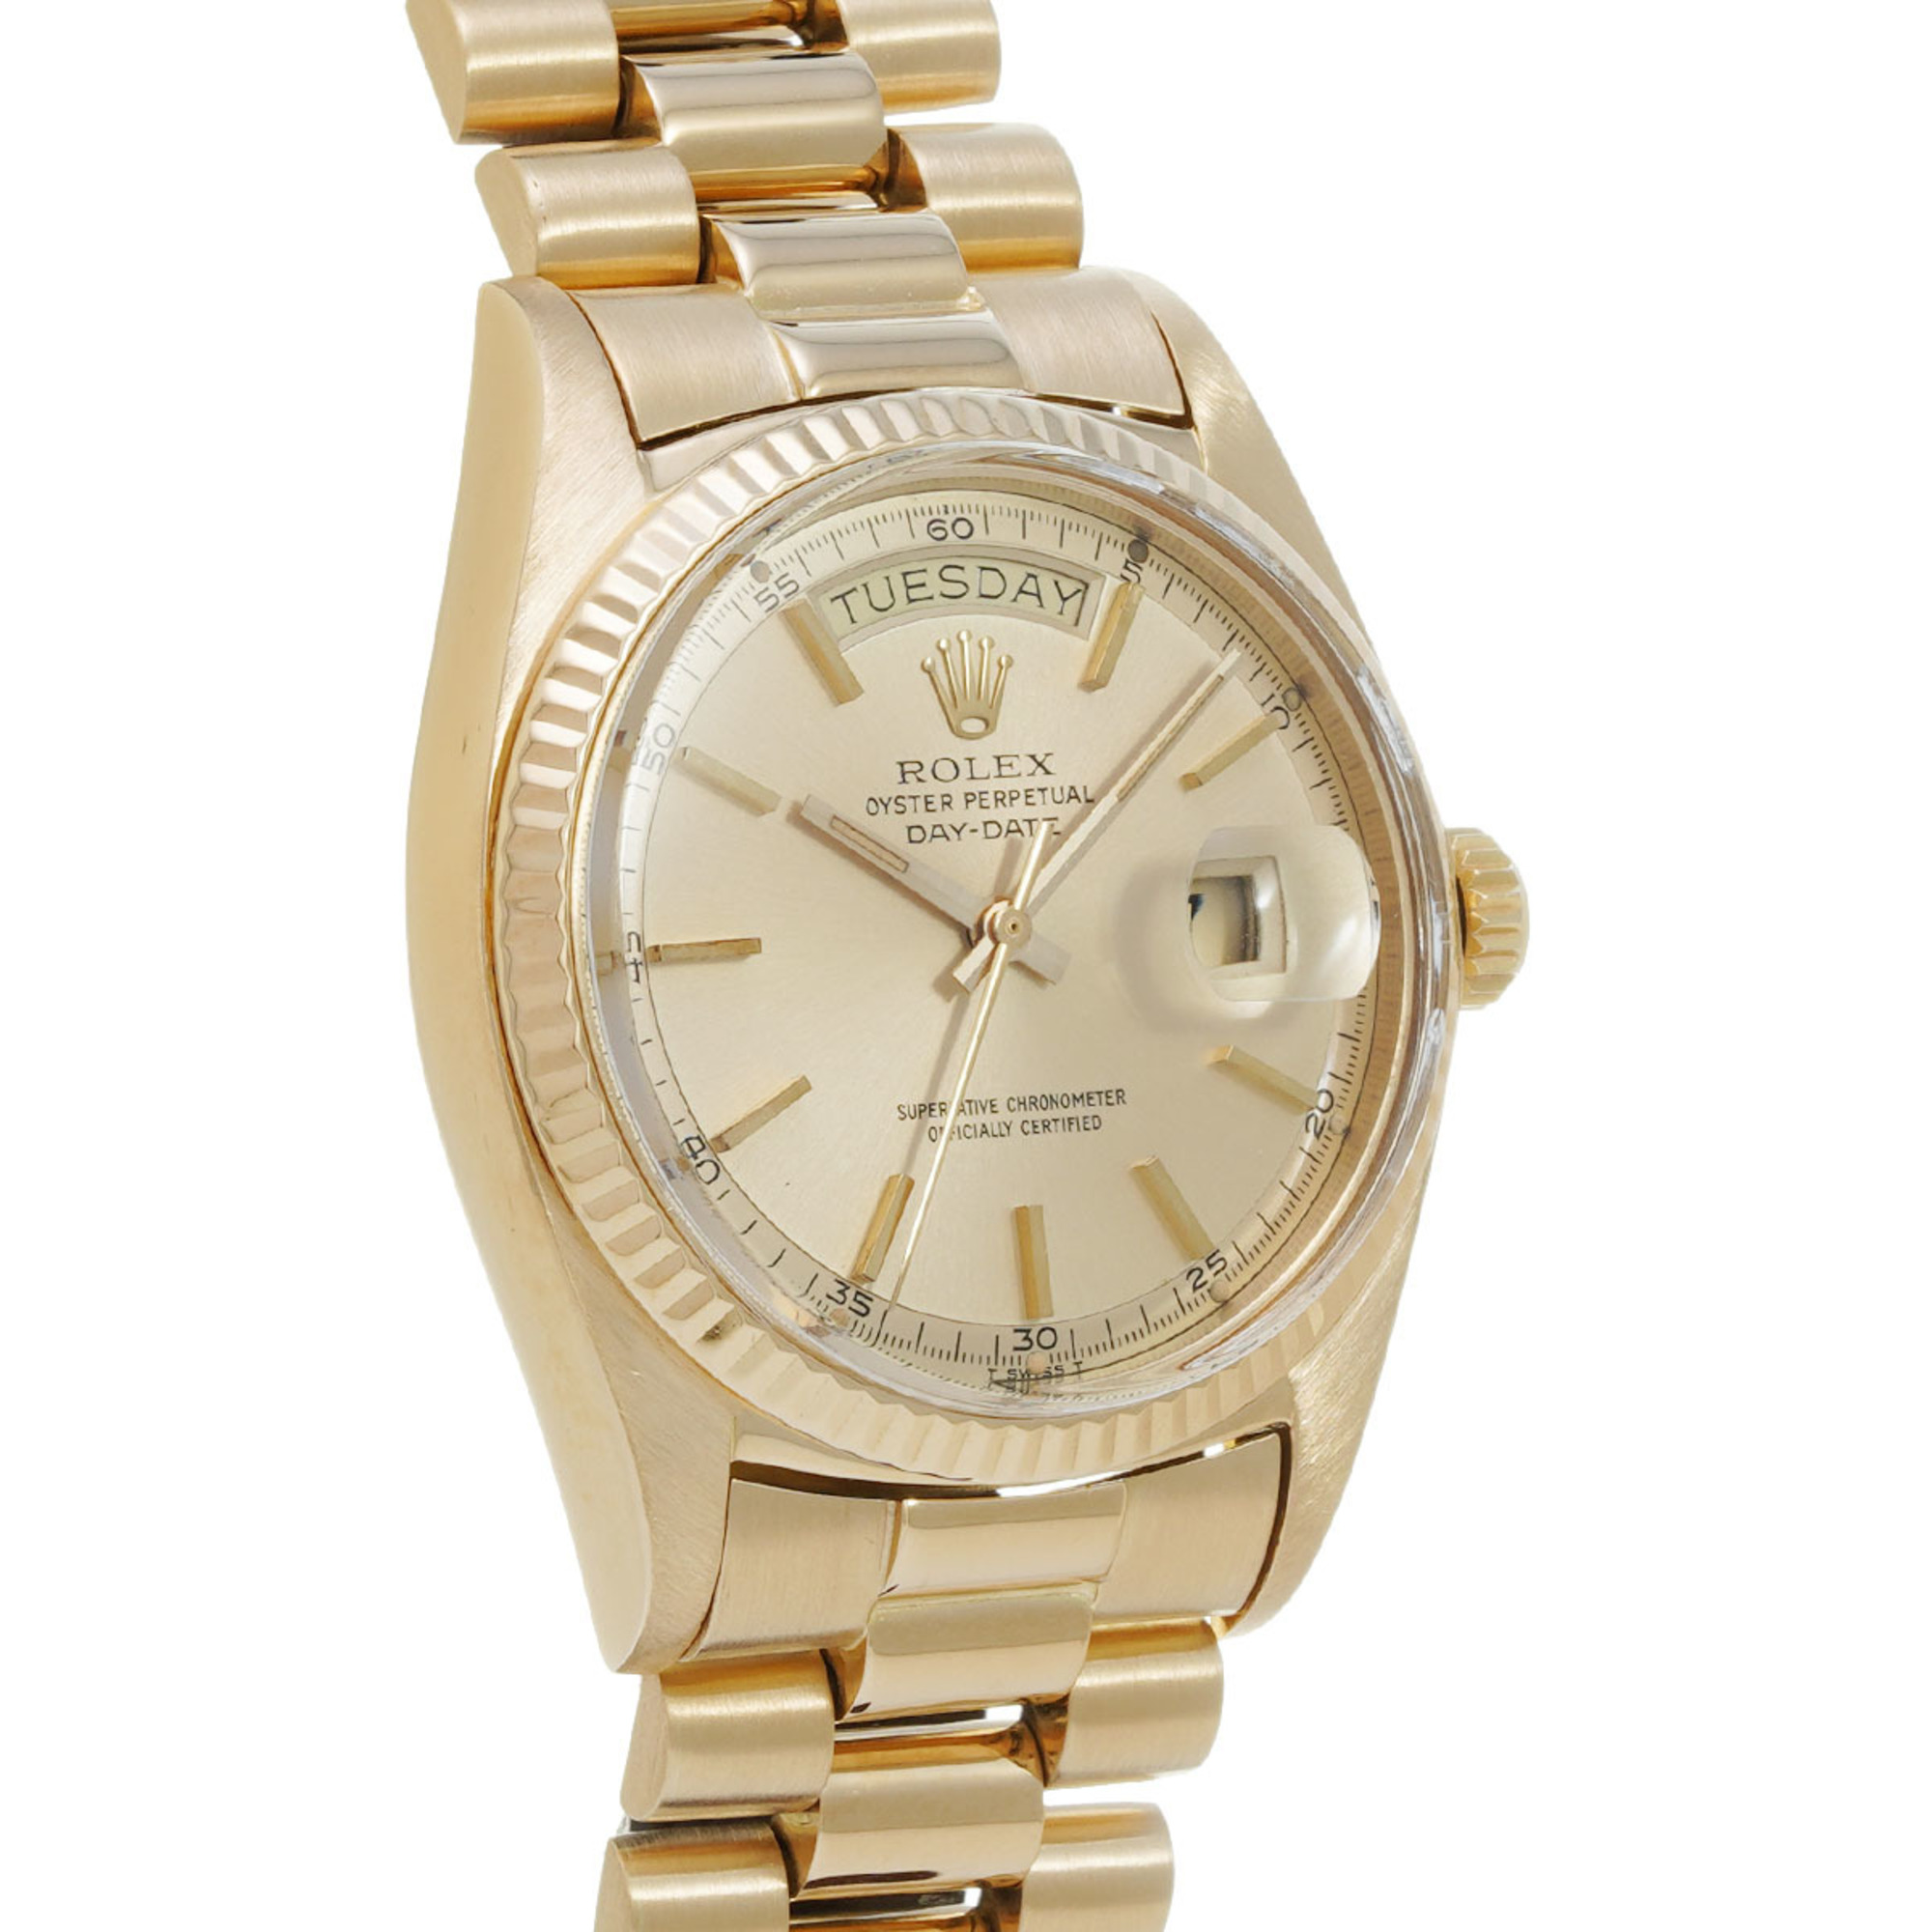 ROLEX Rolex Day-Date 1803 Men's YG Watch Automatic Champagne Dial